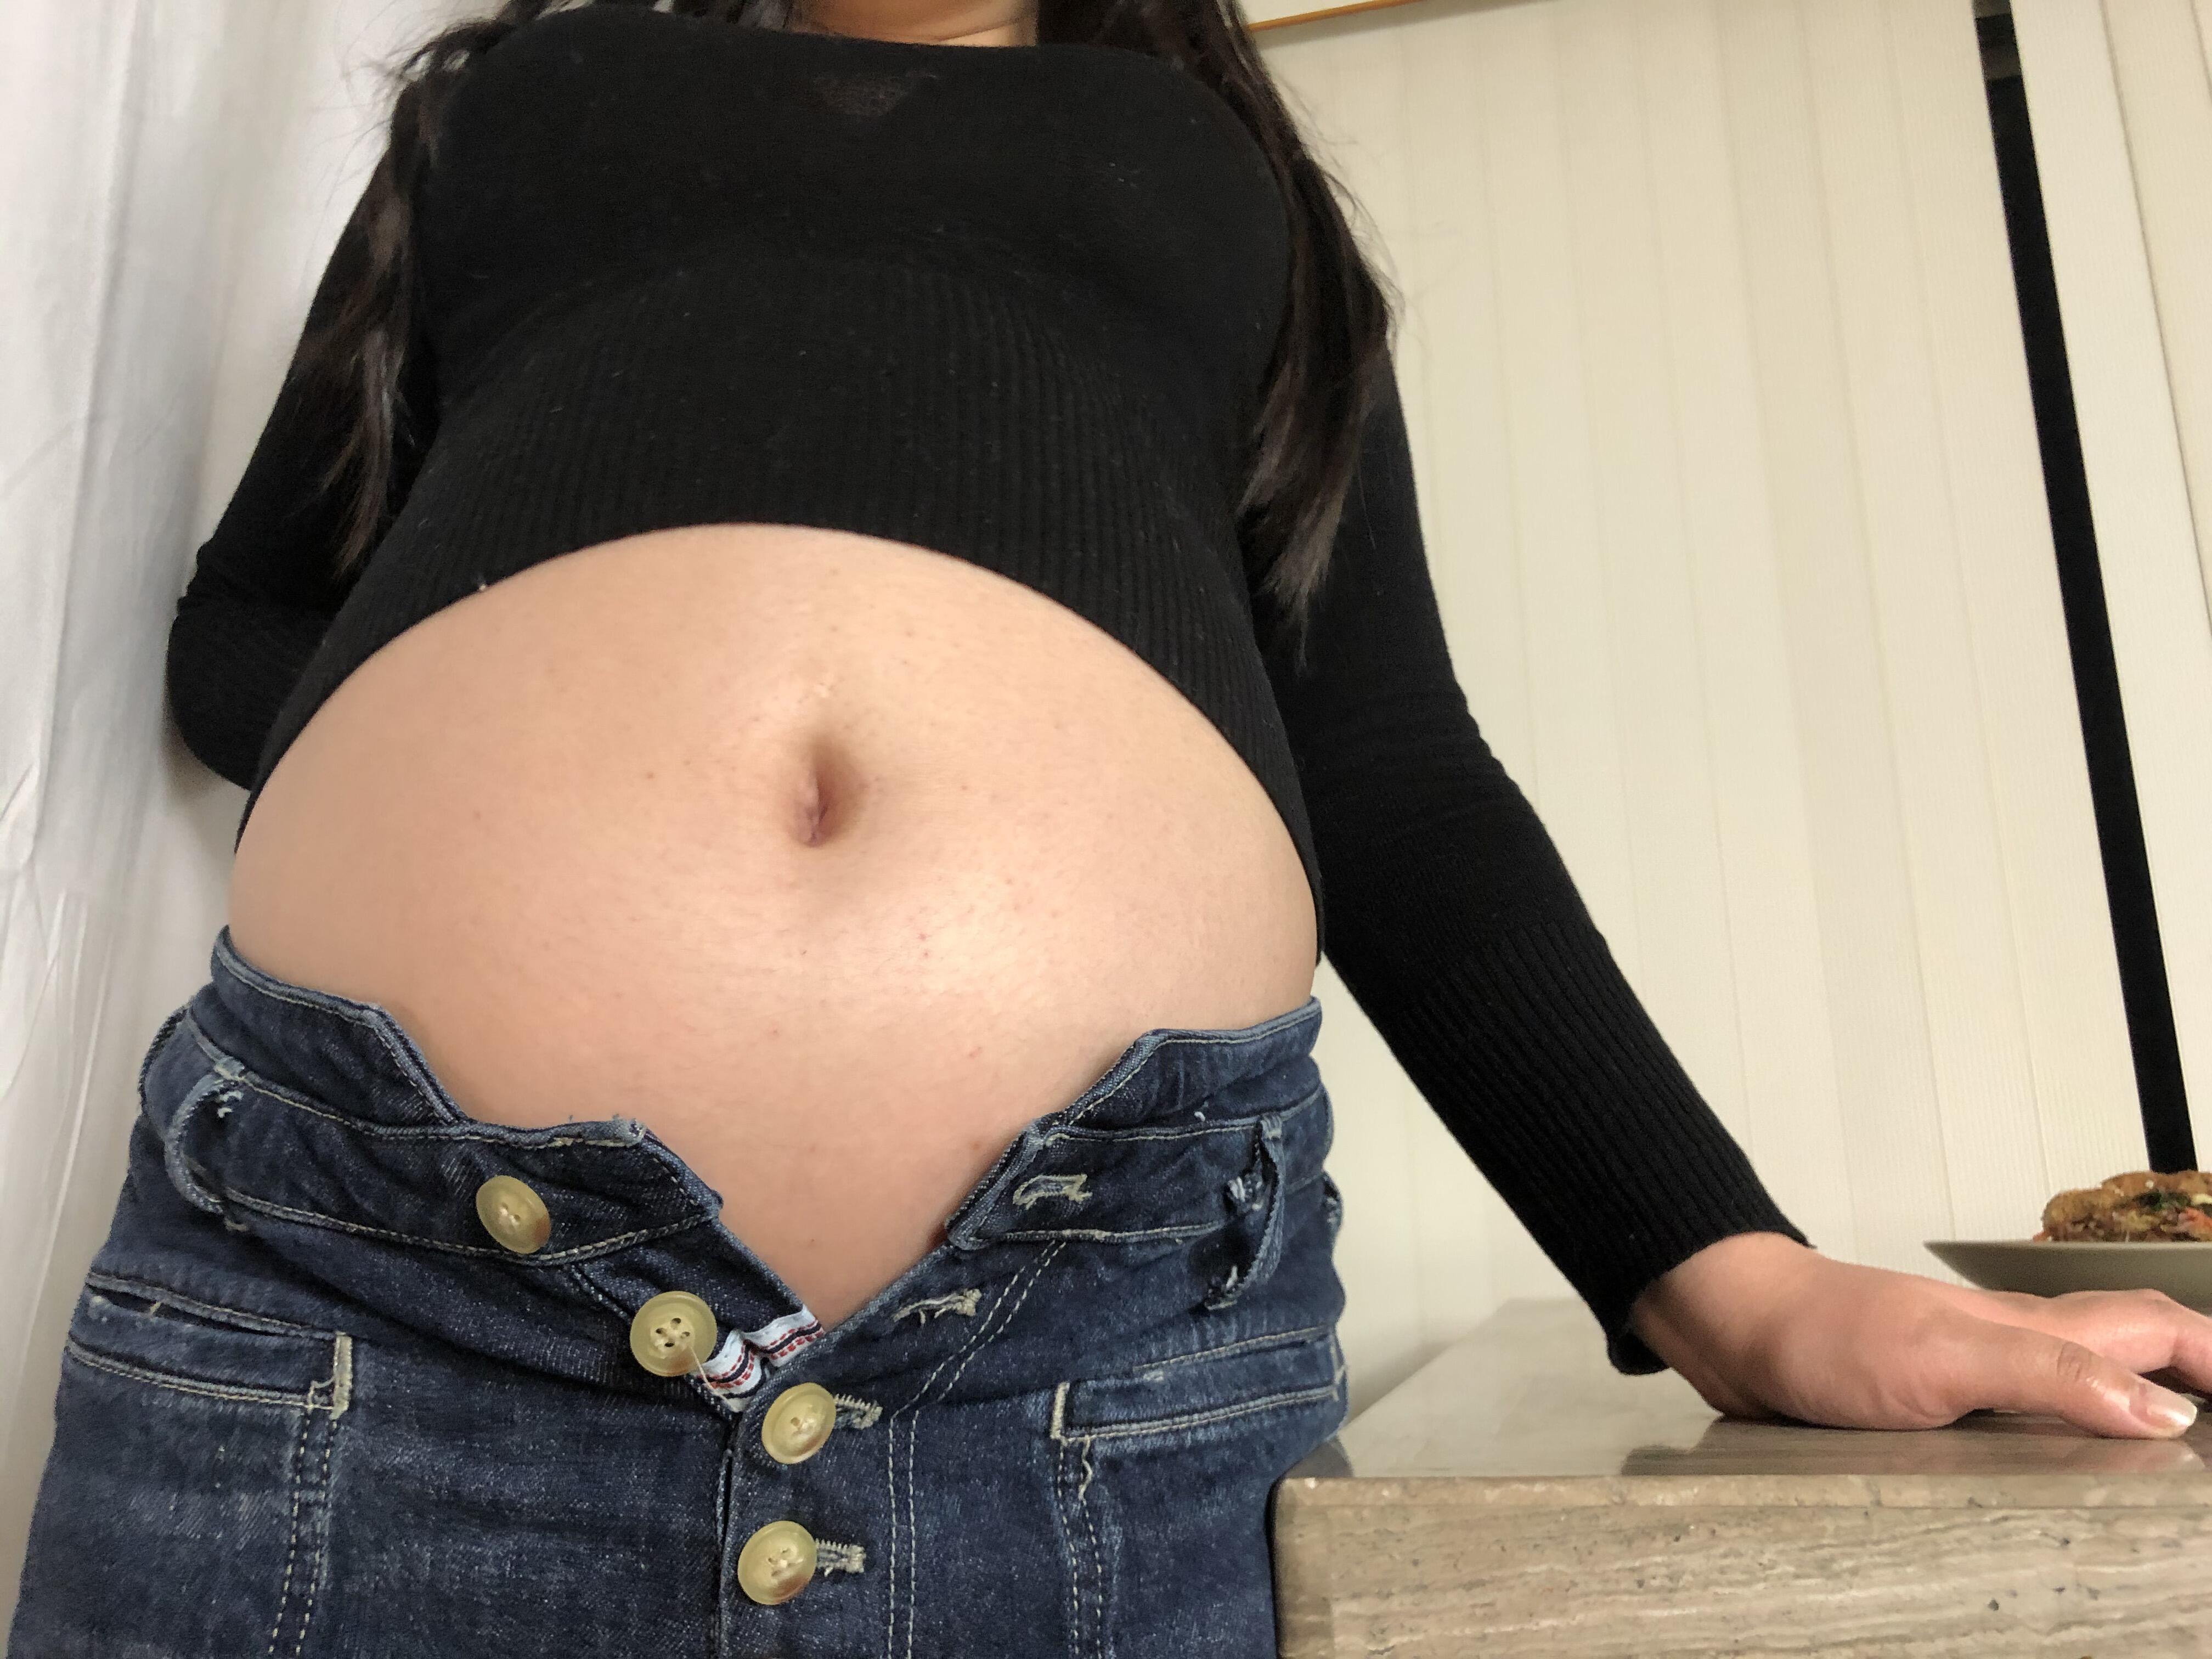 Huge Stuffed Belly Straining Against 5 Button Pants! 